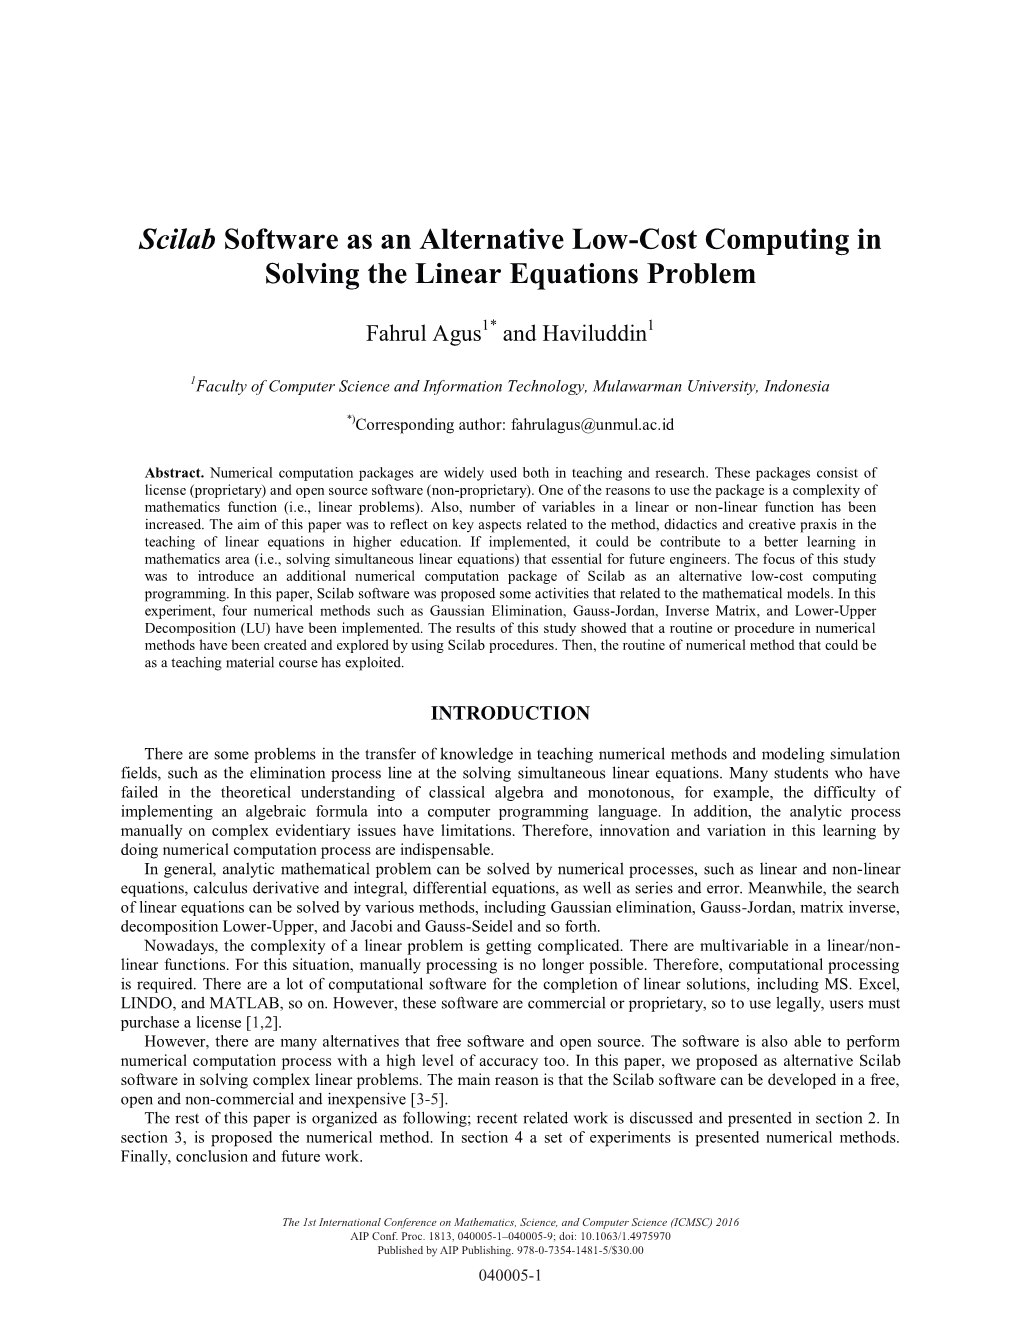 Scilab Software As an Alternative Low-Cost Computing in Solving the Linear Equations Problem